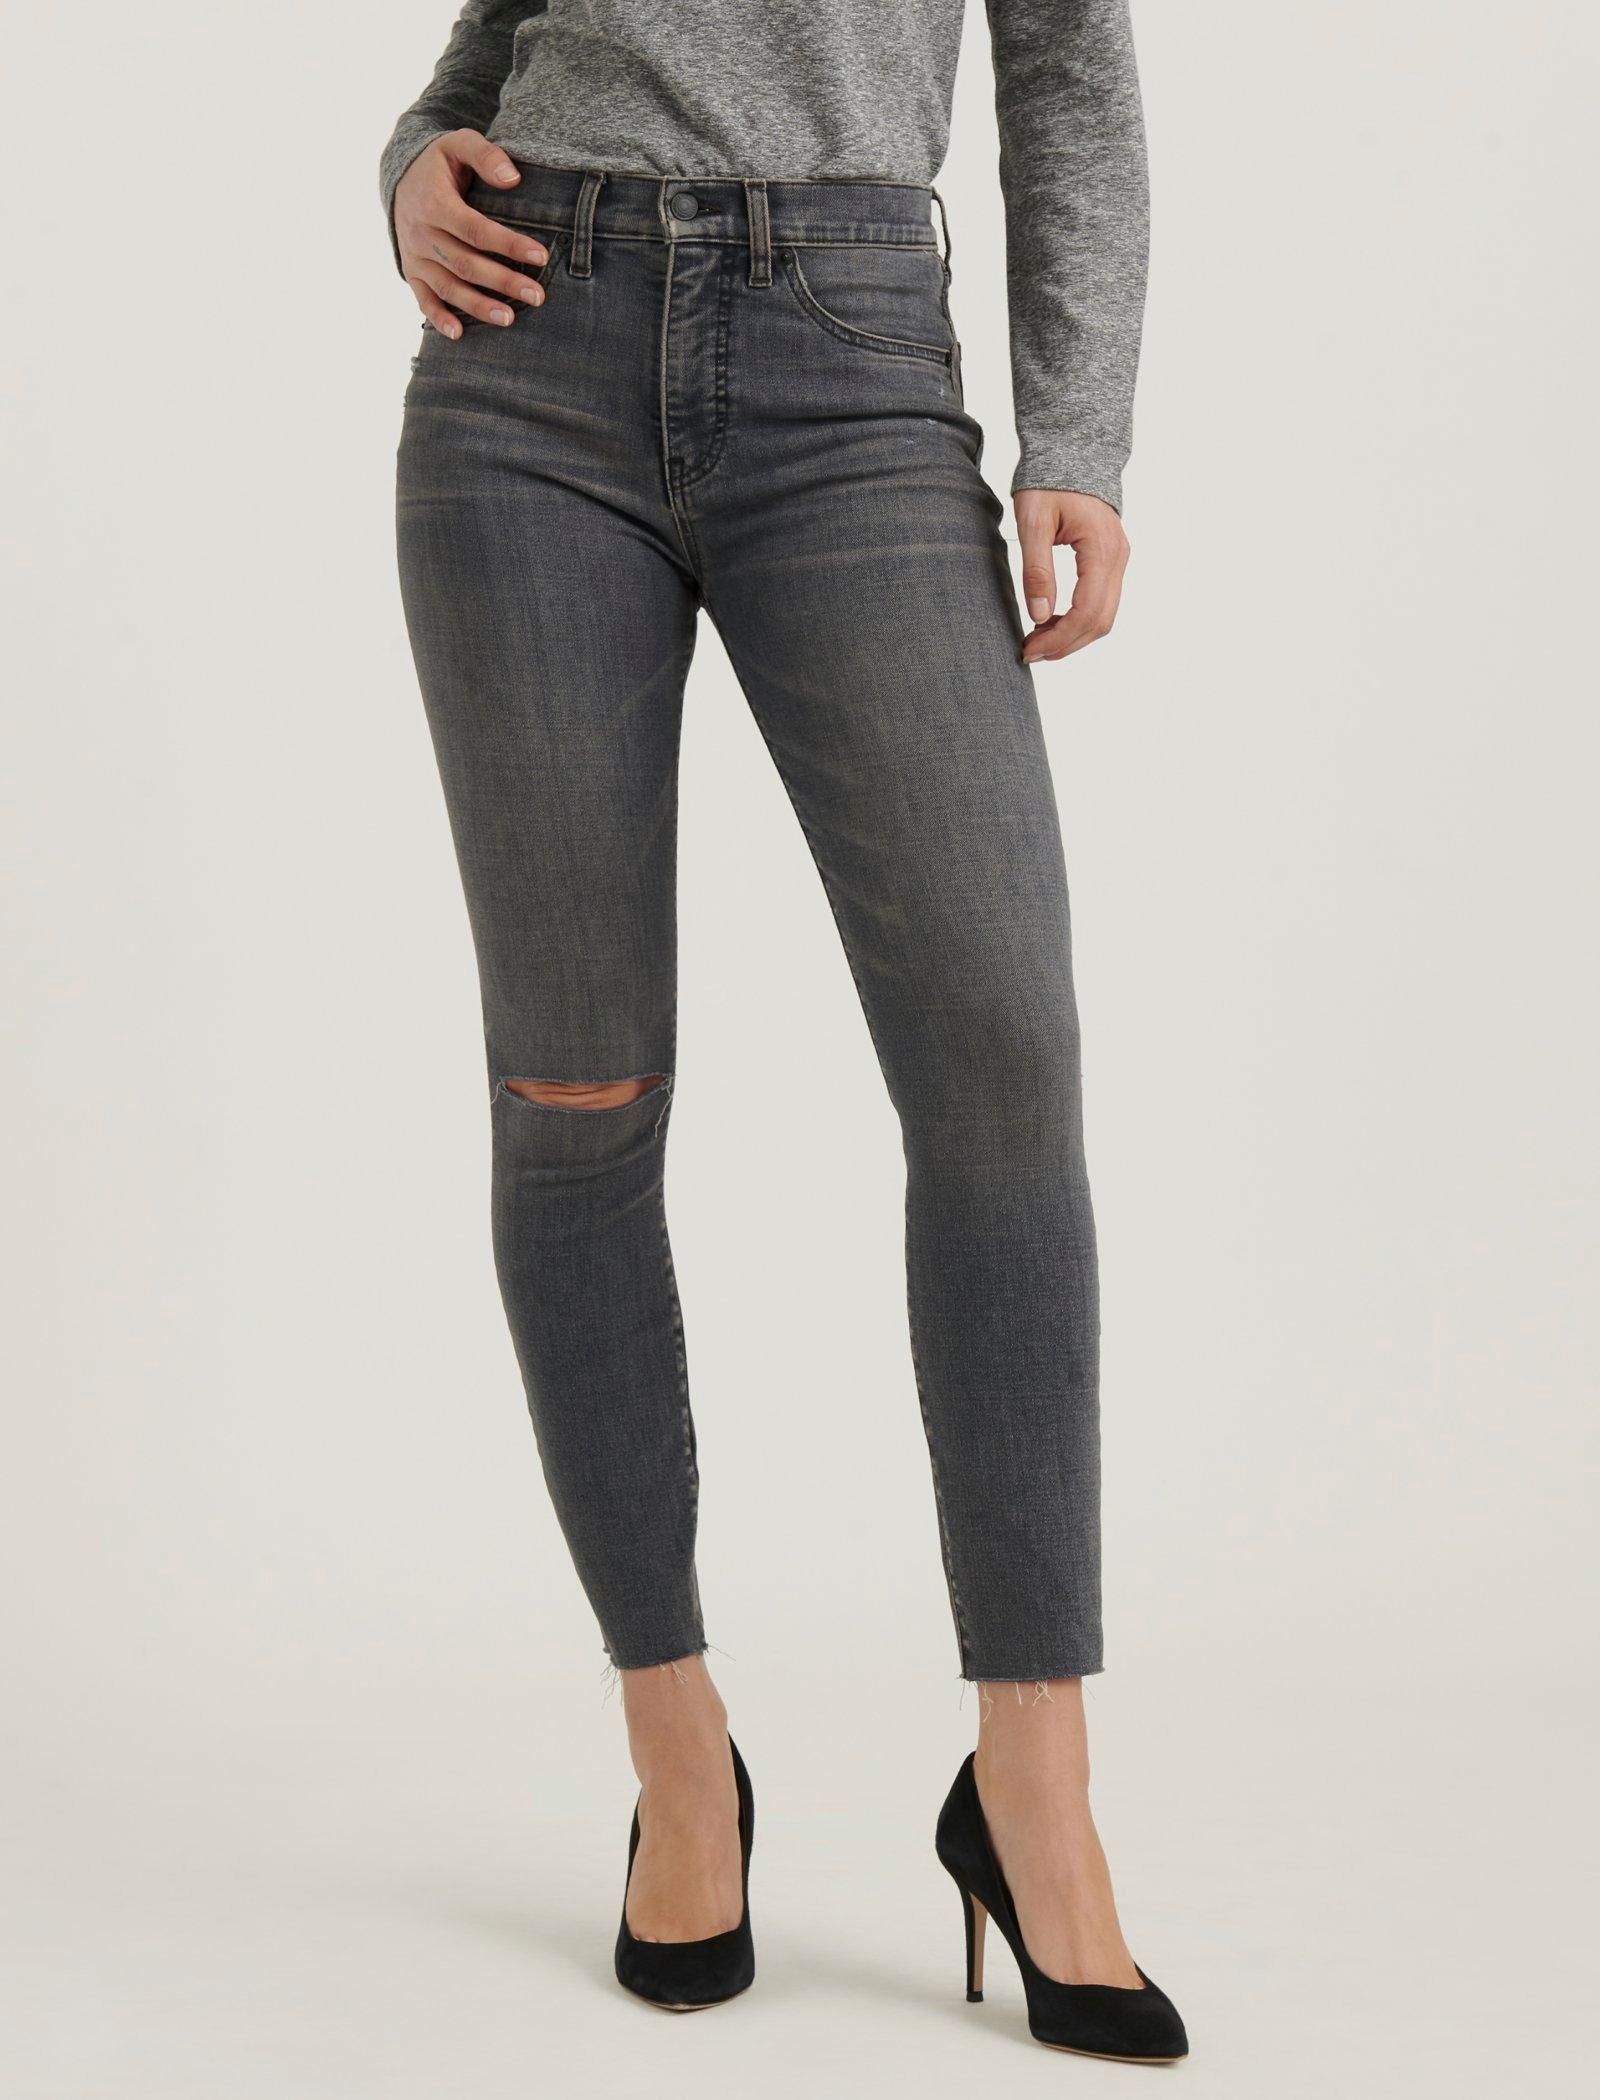 lucky brand grey jeans